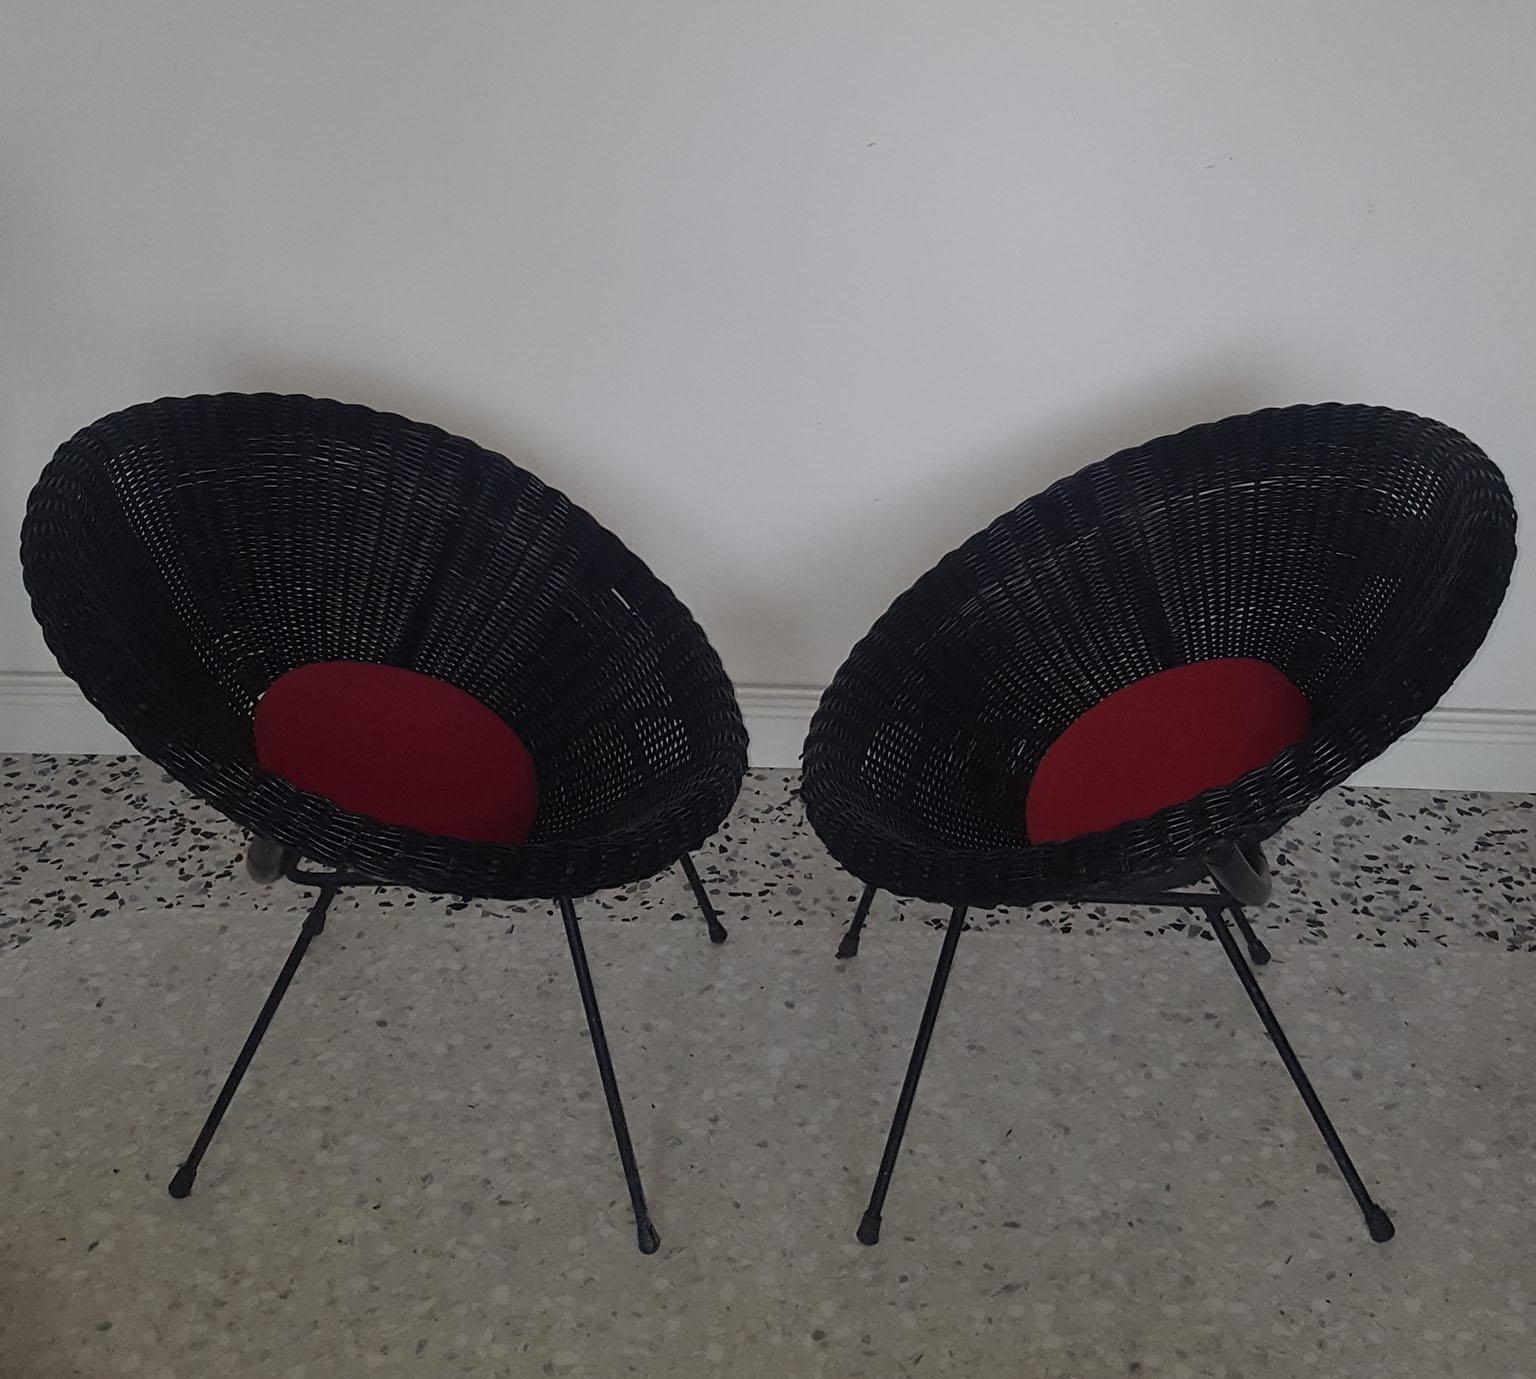 Mid-Century Modern Italian Black Wicker Round Armchairs, Made in Milano, 1950s For Sale 6